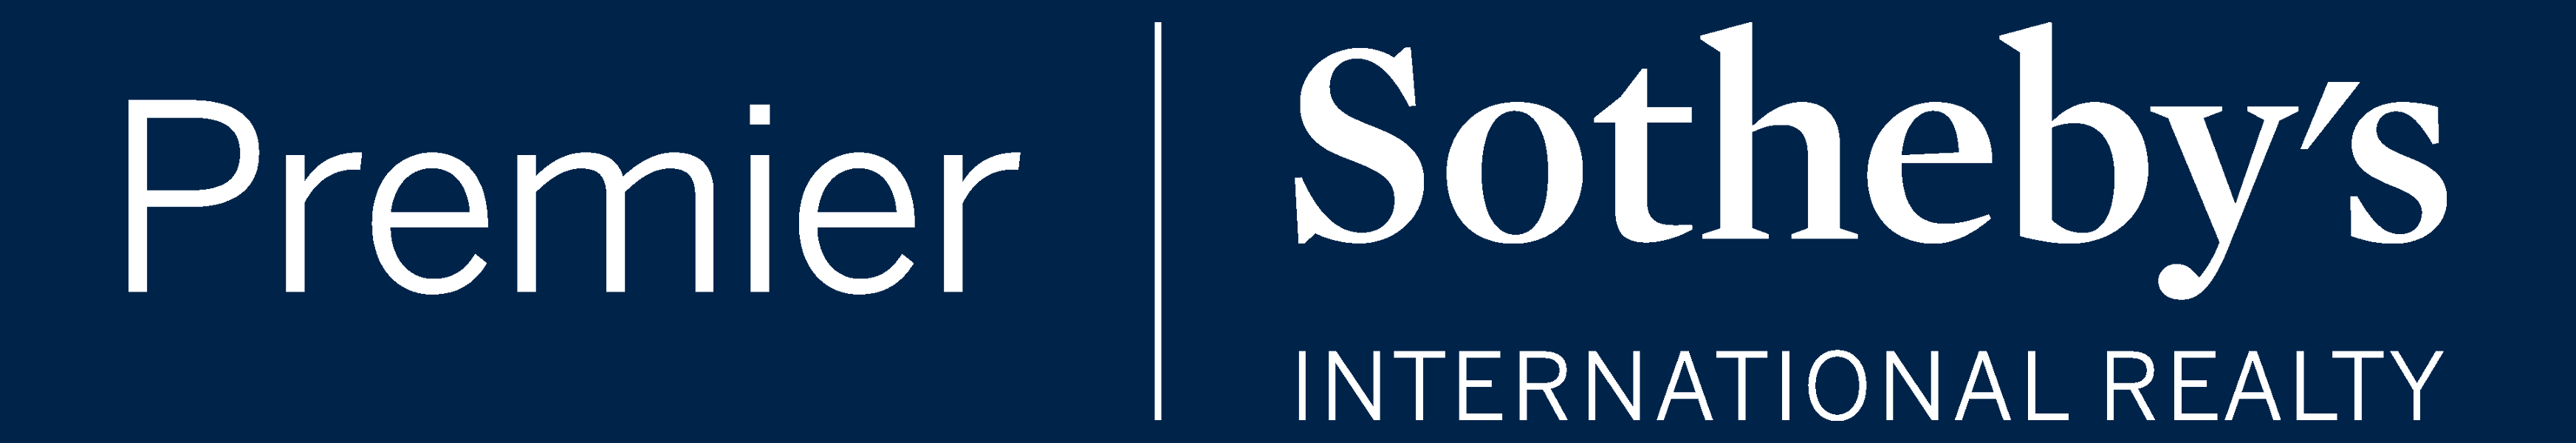 Premier Sotheby's International  Realy